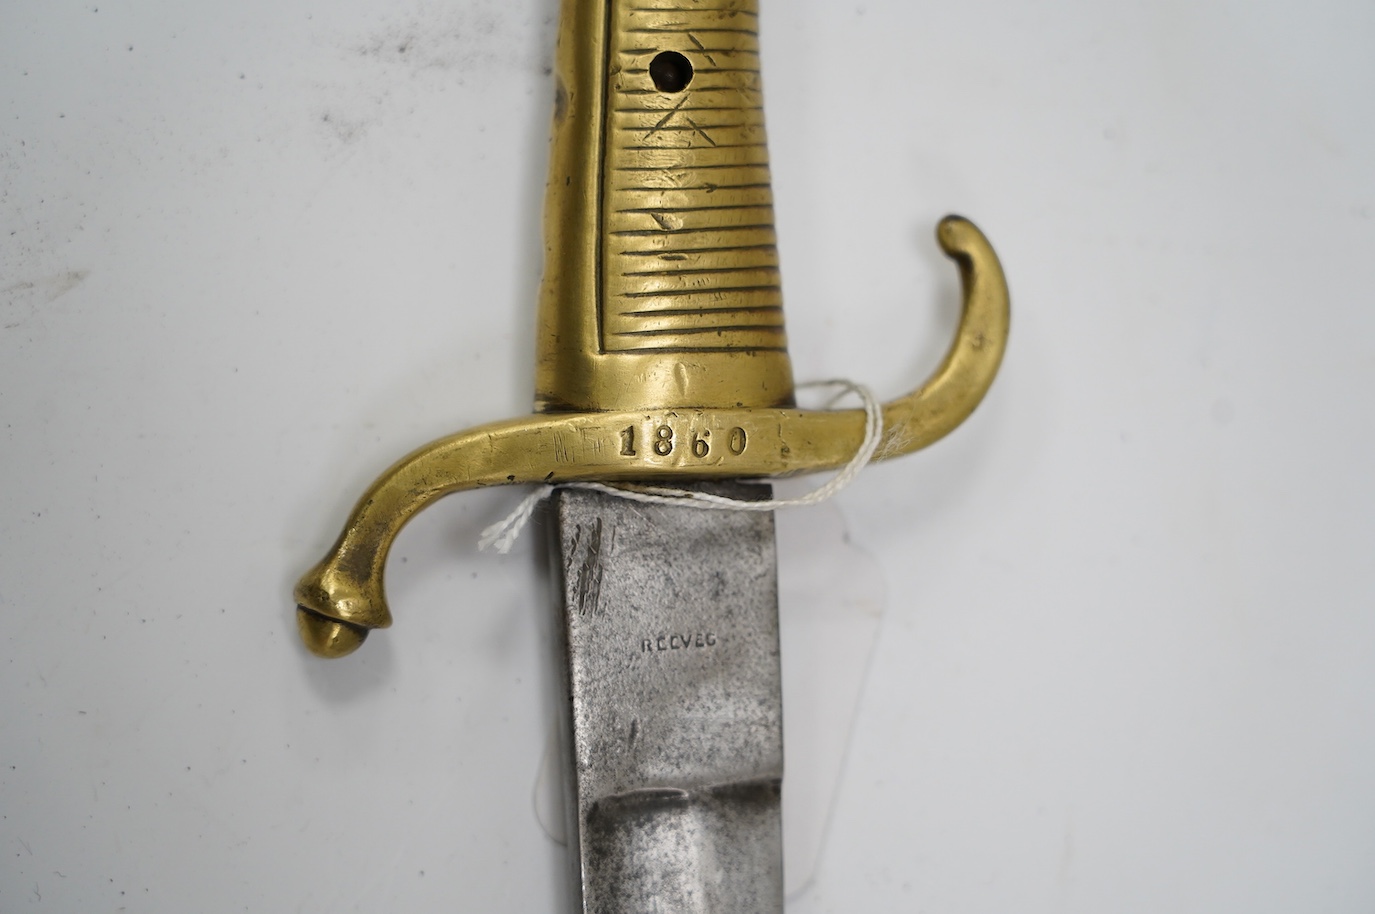 A composite short sword, British military blade by Reeves with Continental brass hilt, blade 66.5cm. Condition - fair